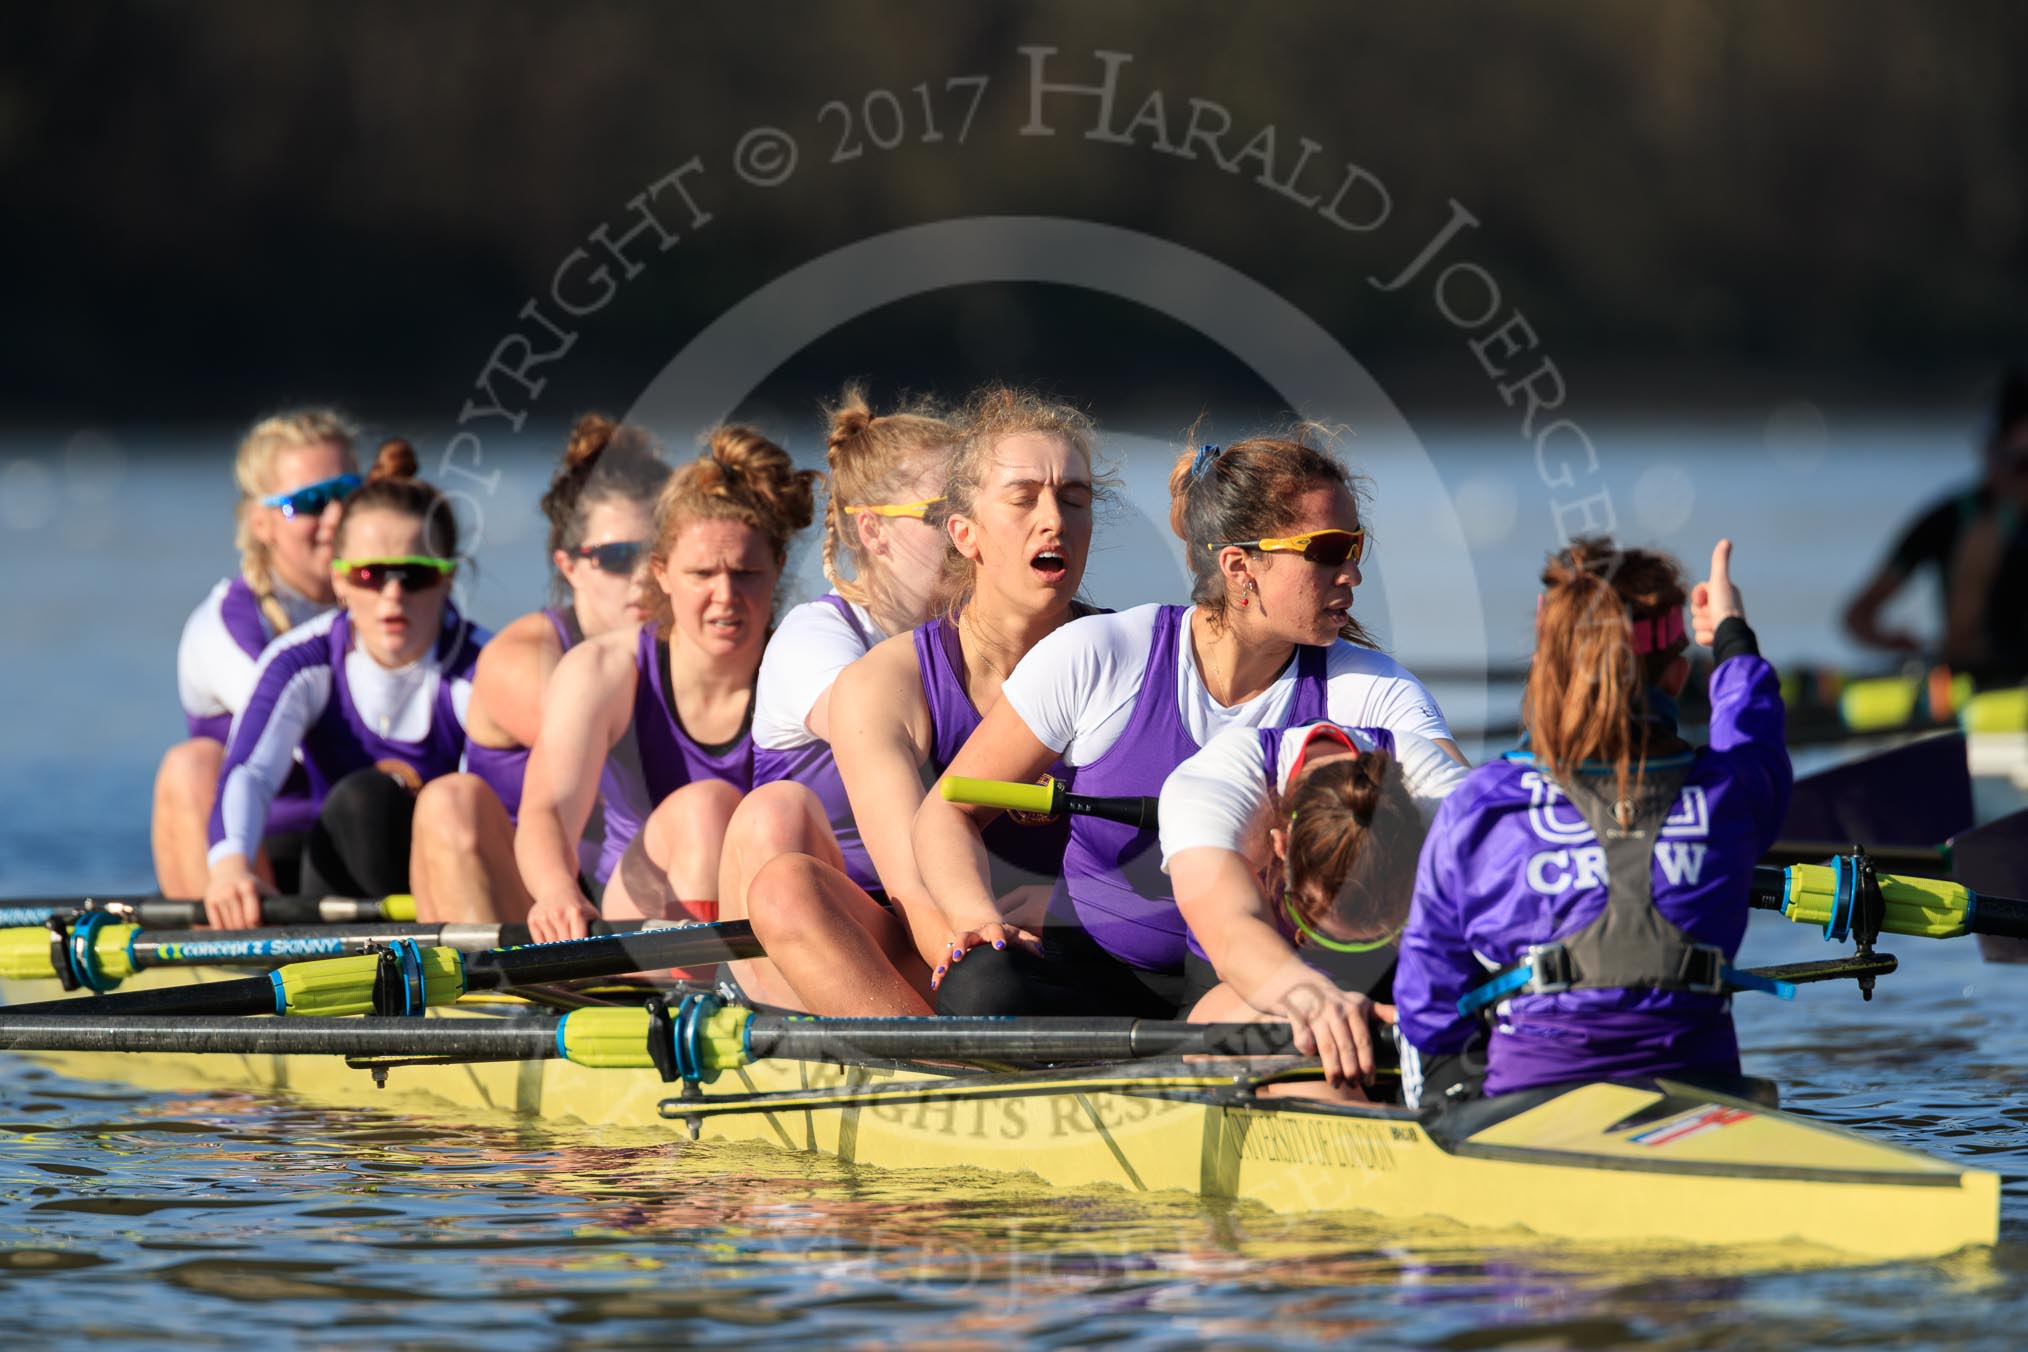 The Women's Boat Race season 2018 - fixture CUWBC vs. ULBC: ULBC, having crossed the finish line in second place again, bow Ally French, 2 Robyn Hart-Winks, 3 Fionnuala Gannon, 4 Katherine Barnhill, 5 Hannah Roberts, 6 Oonagh Cousins, 7 Jordan Cole-Huissan, stroke Issy Powel, cox Lauren Holland.
River Thames between Putney Bridge and Mortlake,
London SW15,

United Kingdom,
on 17 February 2018 at 13:35, image #175